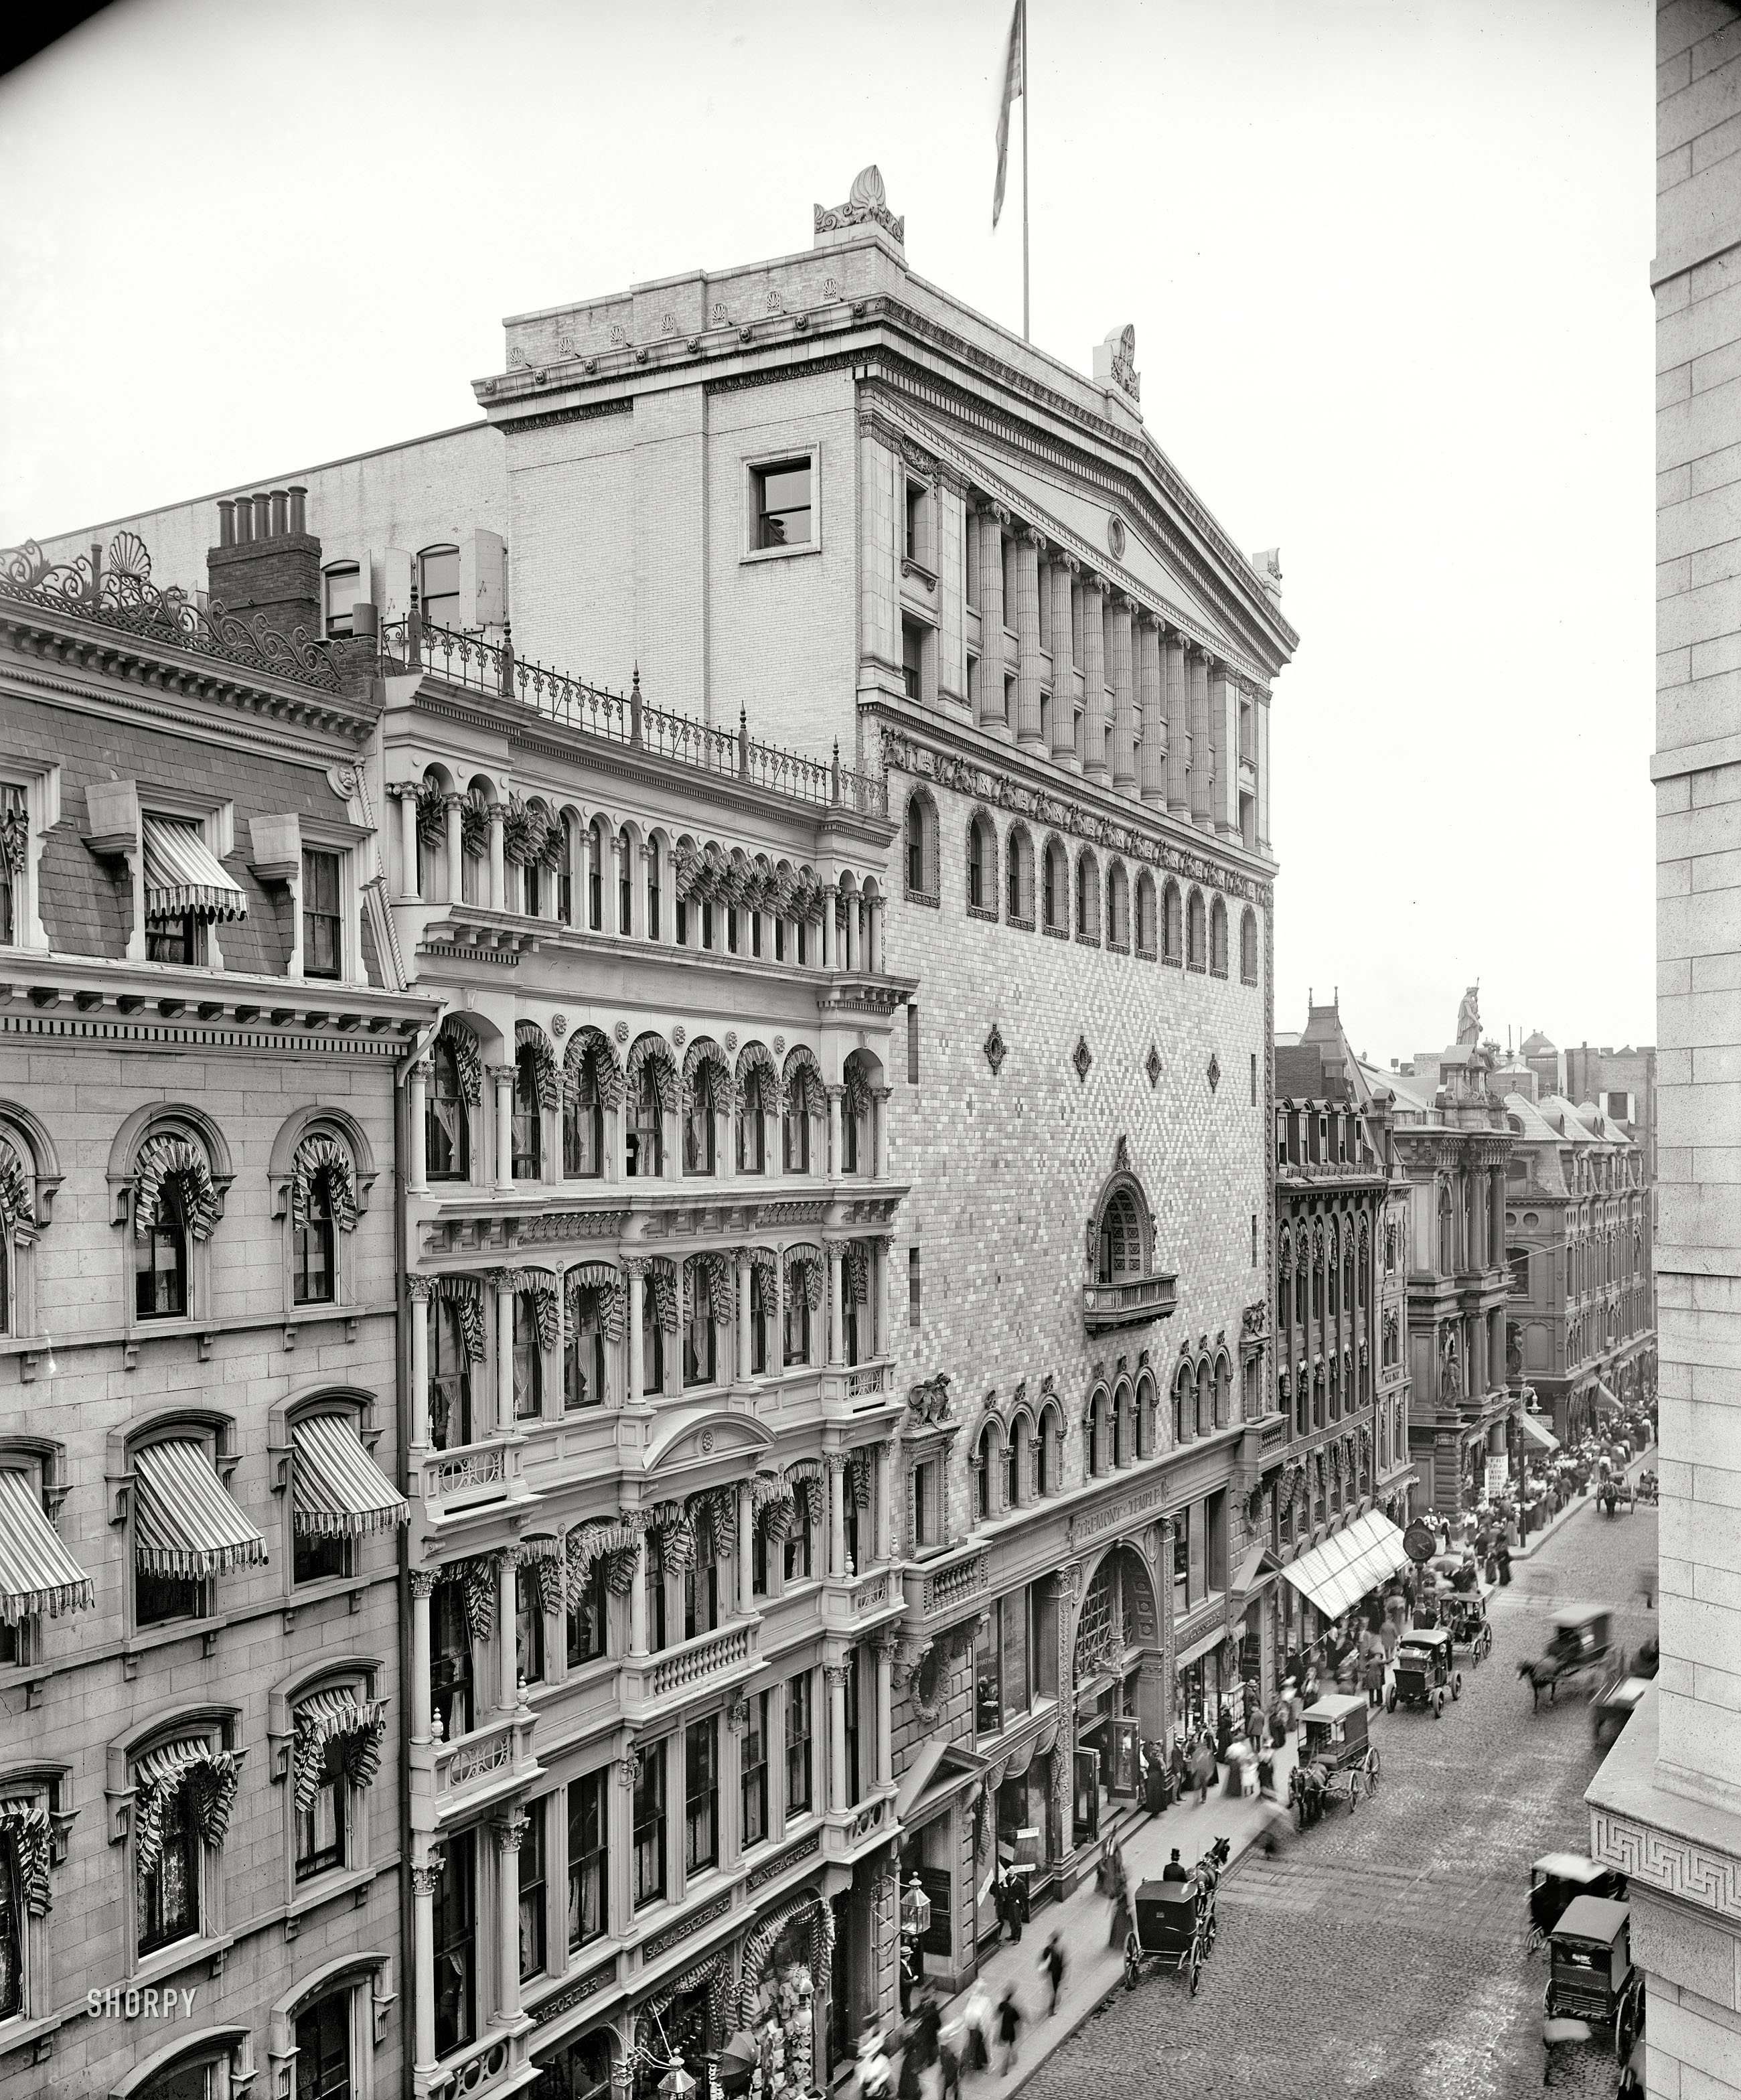 Circa 1900. "Tremont Temple, Boston." The Baptist church and auditorium. 8x10 inch dry plate glass negative, Detroit Publishing Company. View full size.